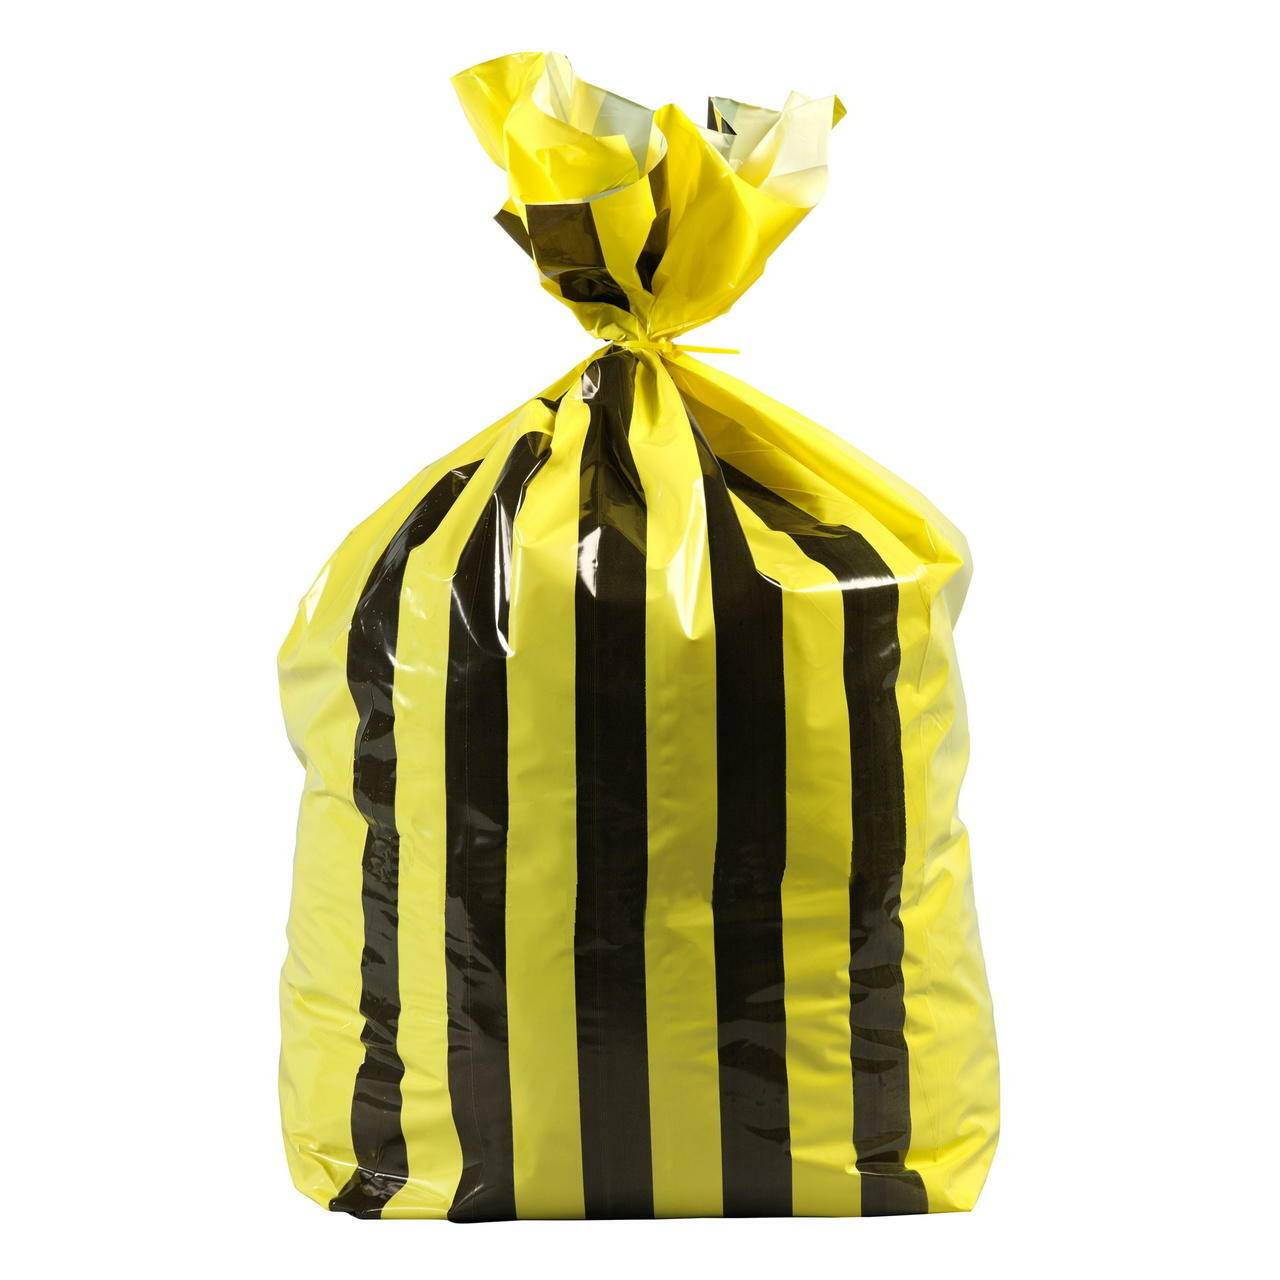 90L Large Double Sided Print Tiger Stripe Polythene Offensive Waste Bags 25mu - 1 Roll of 25 - UKMEDI